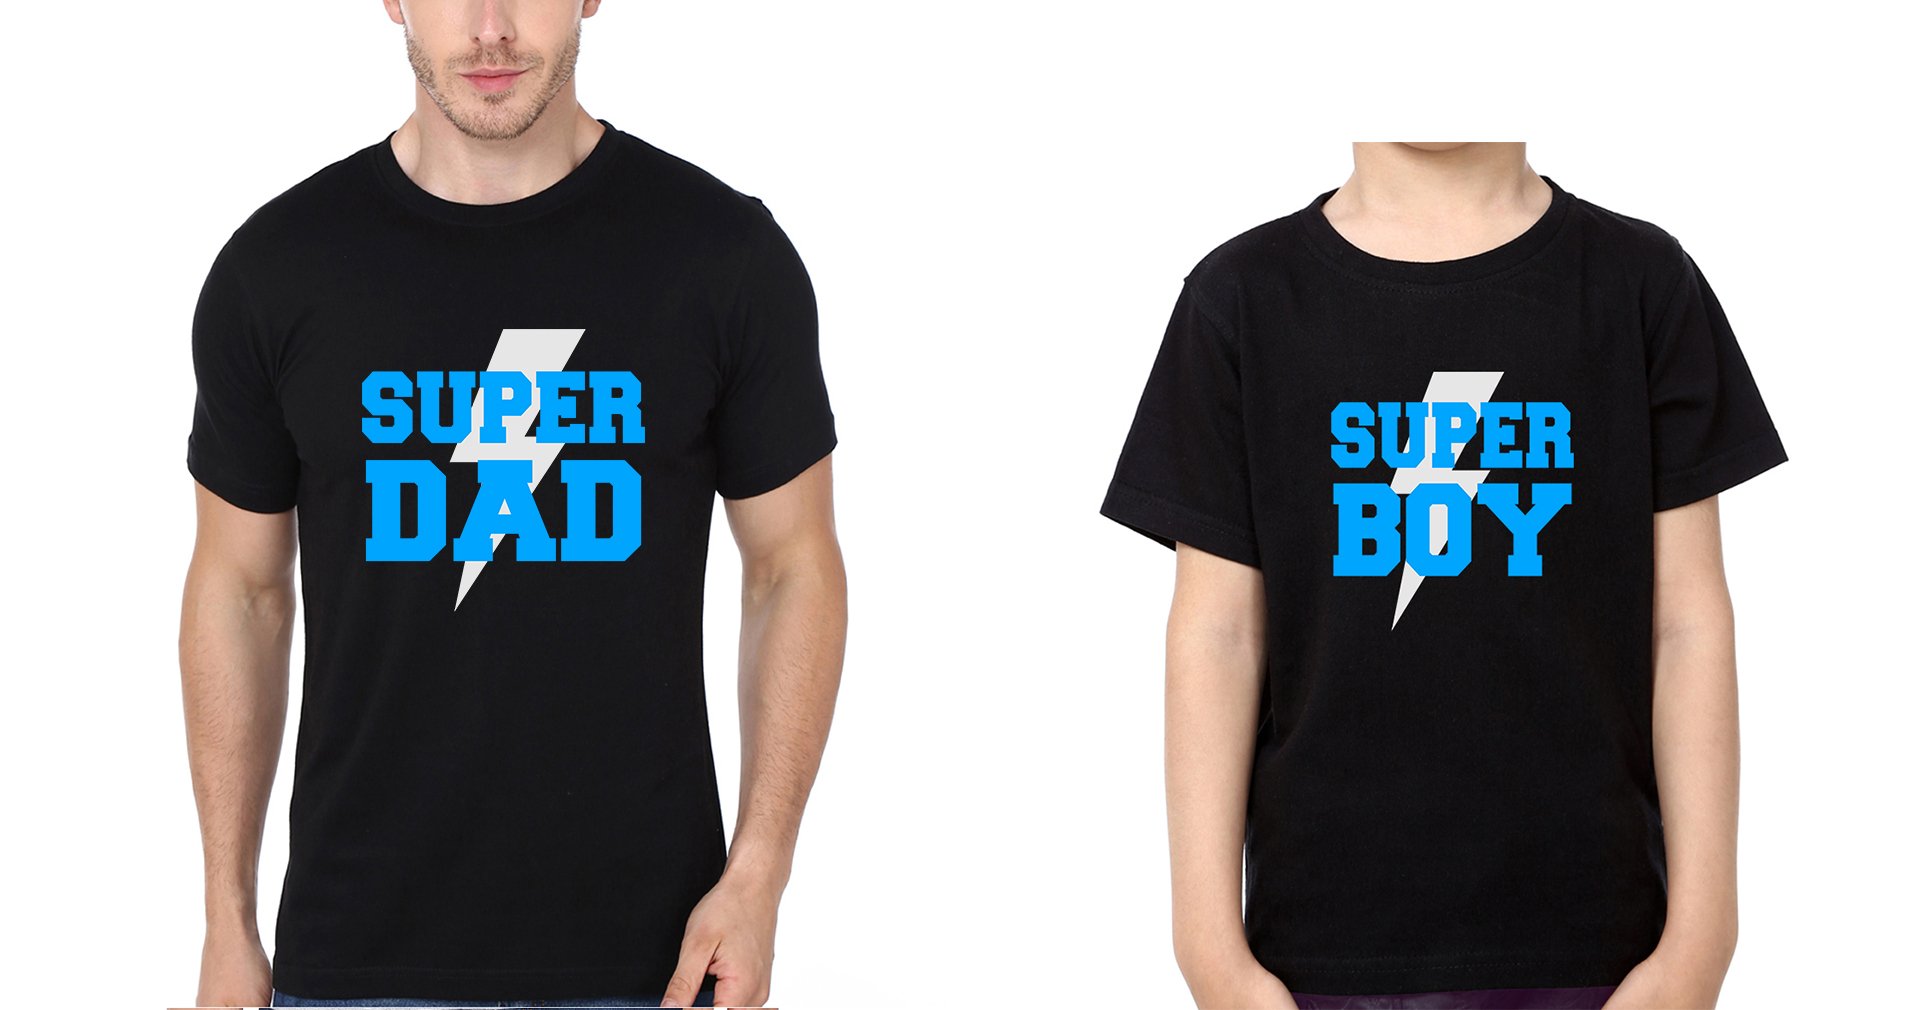 Super Dad & Super Boy Father and Son Matching T-Shirt- FunkyTeesClub